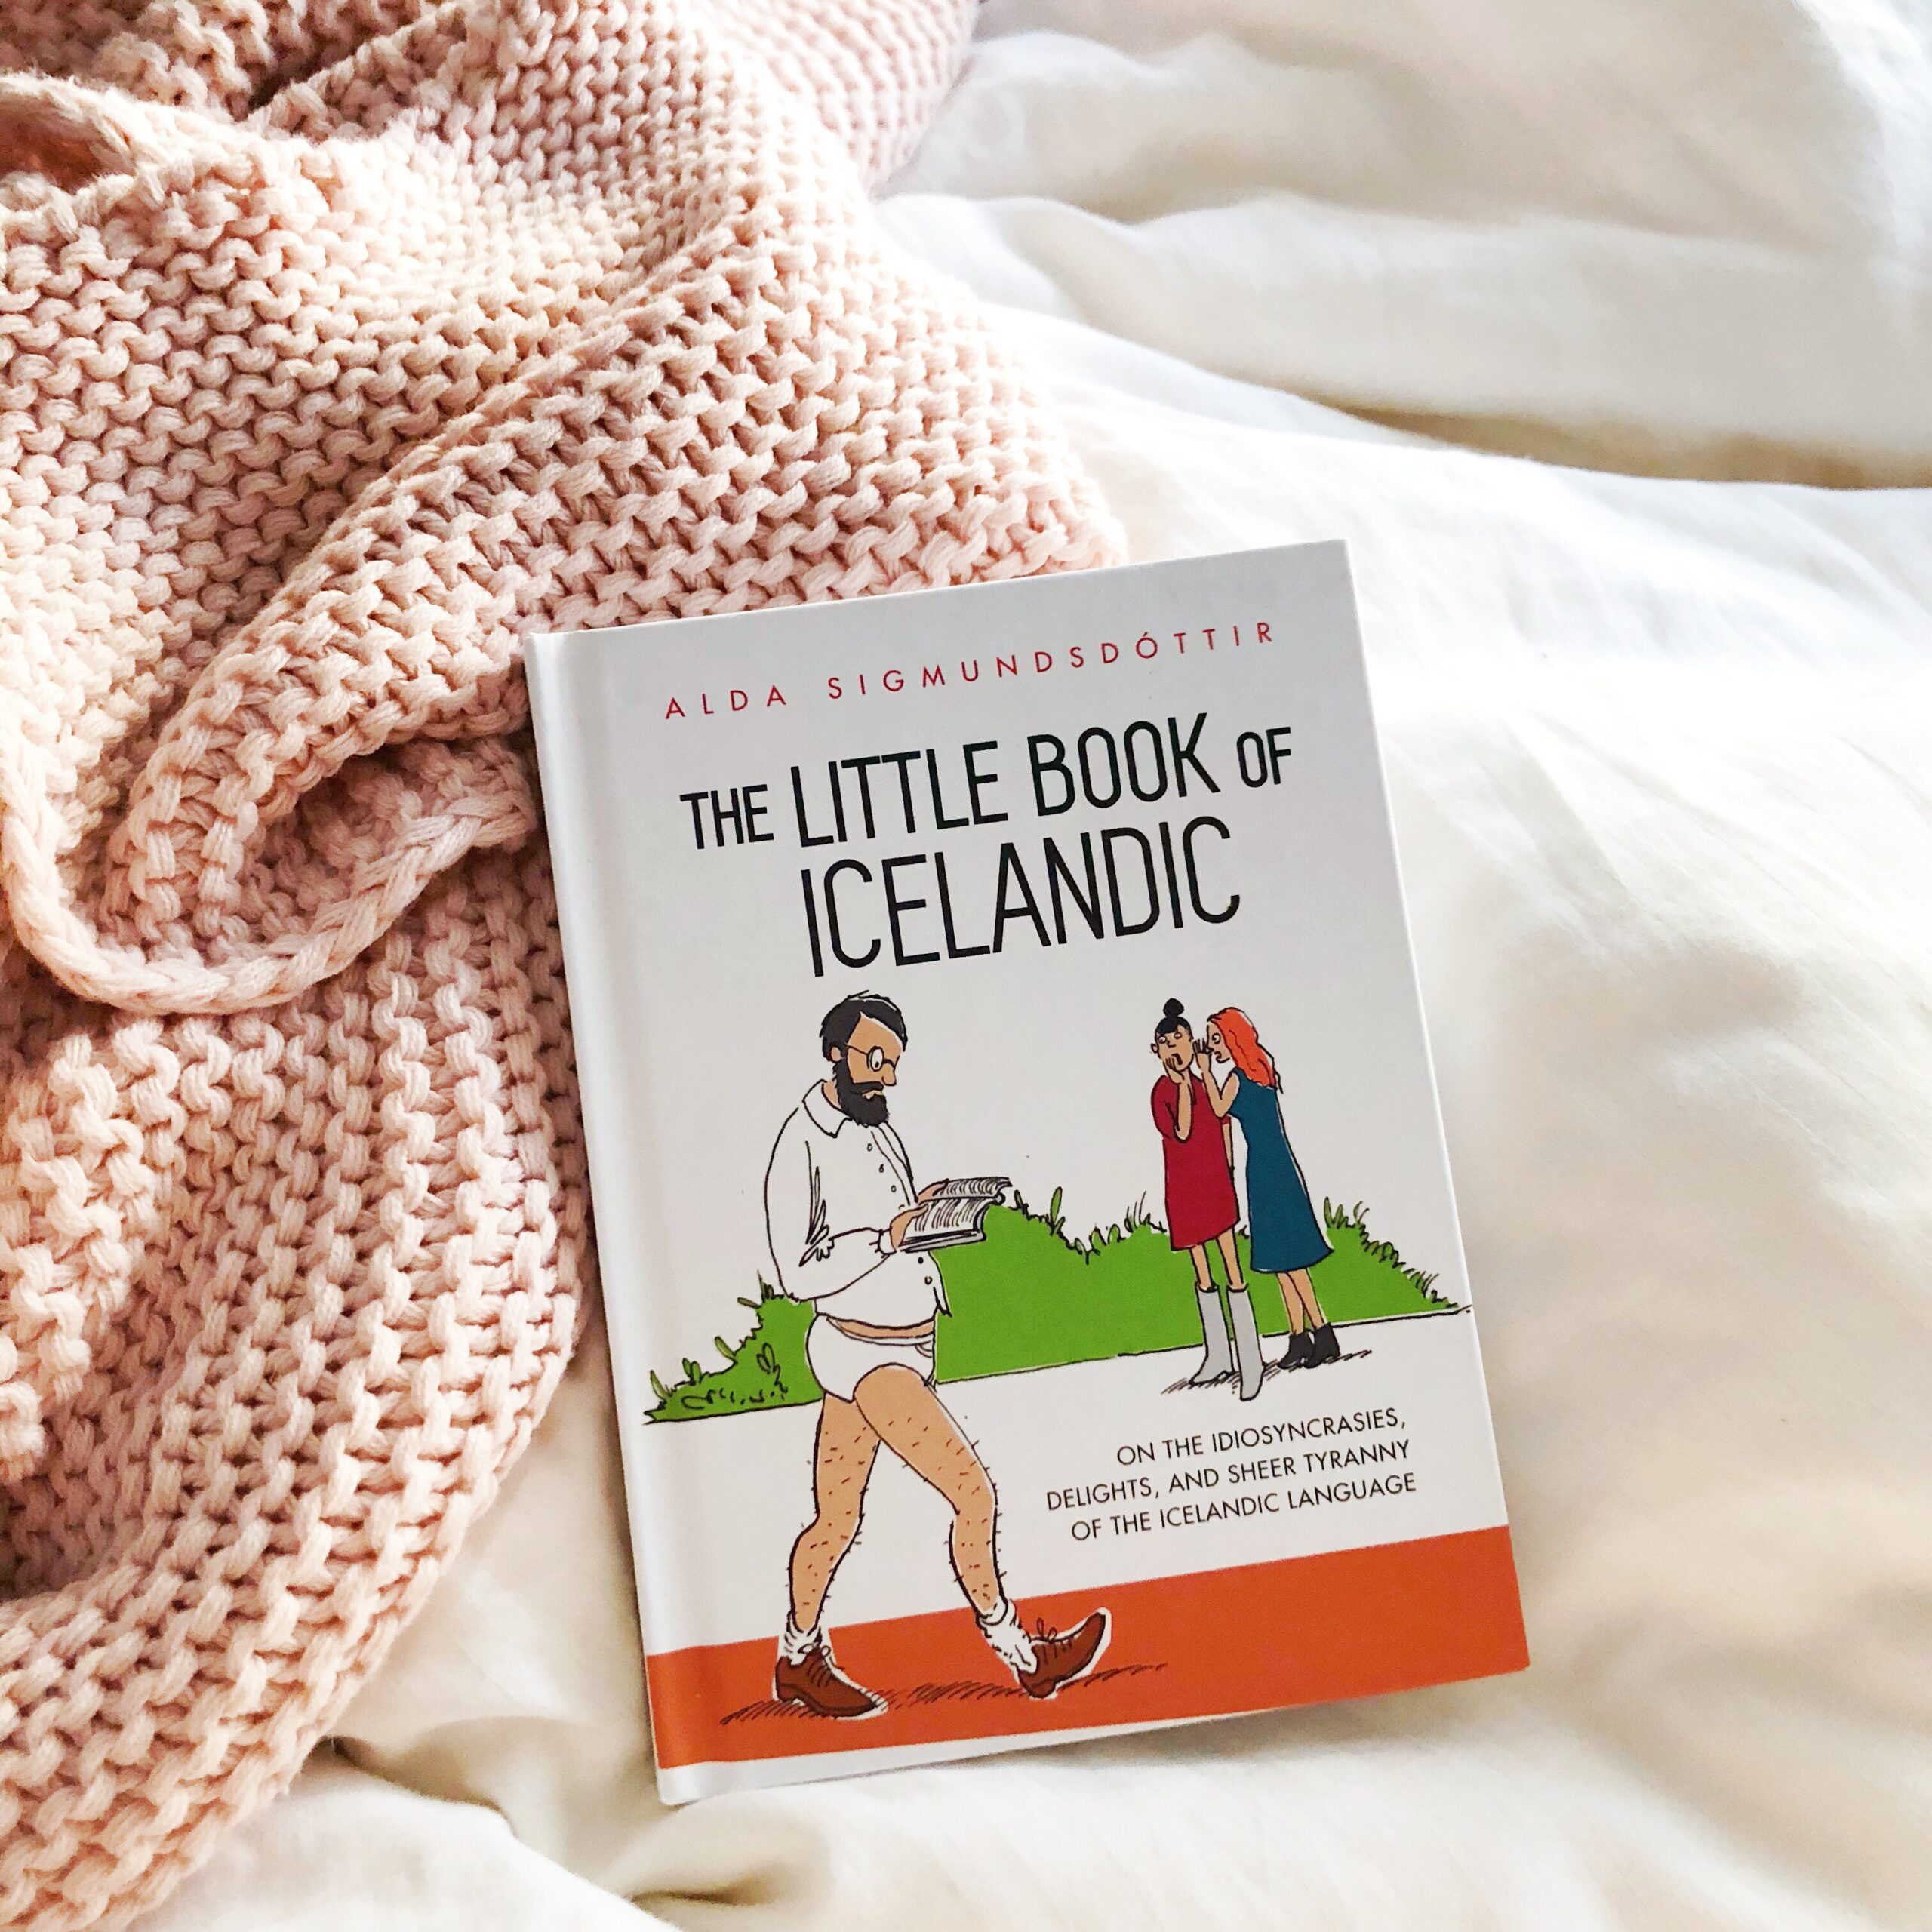 Hardcover copy of The Little Book of Icelandic lying on a cloth